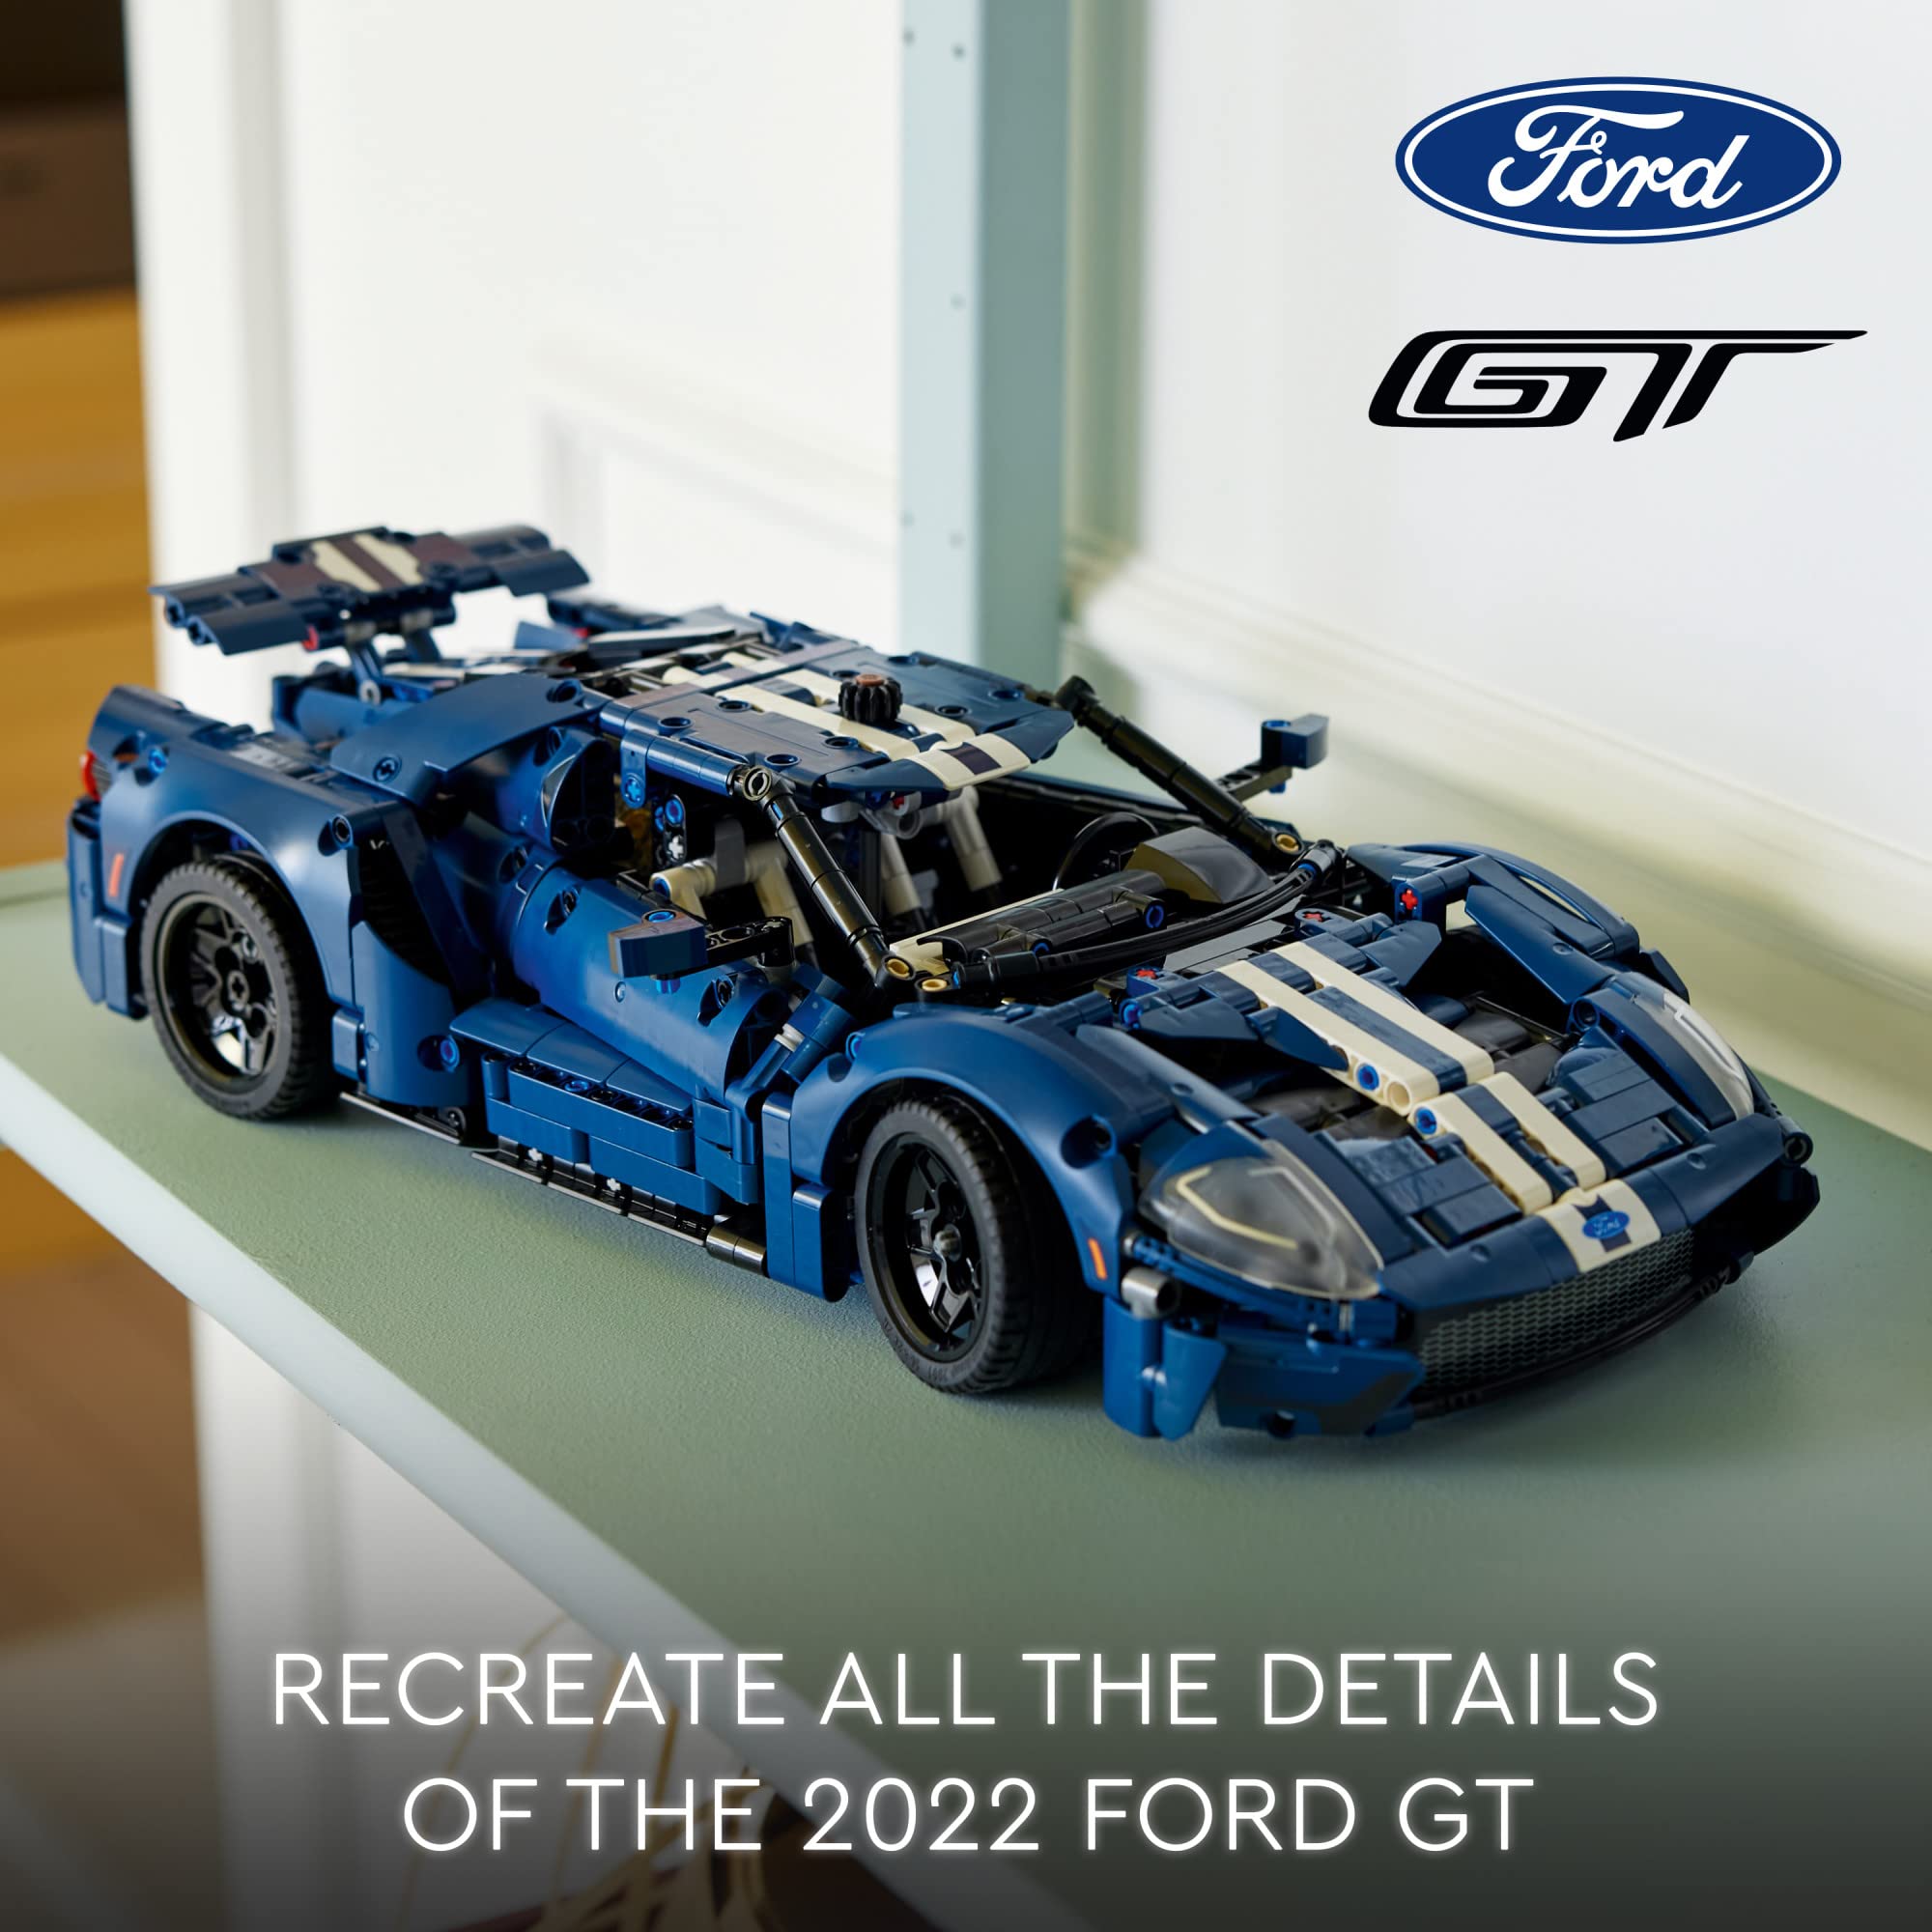 LEGO Technic 2022 Ford GT 42154 Car Model Kit for Adults to Build, Collectible Set, 1:12 Scale Supercar with Authentic Features, Gift Idea That Fuels Creativity and Imagination